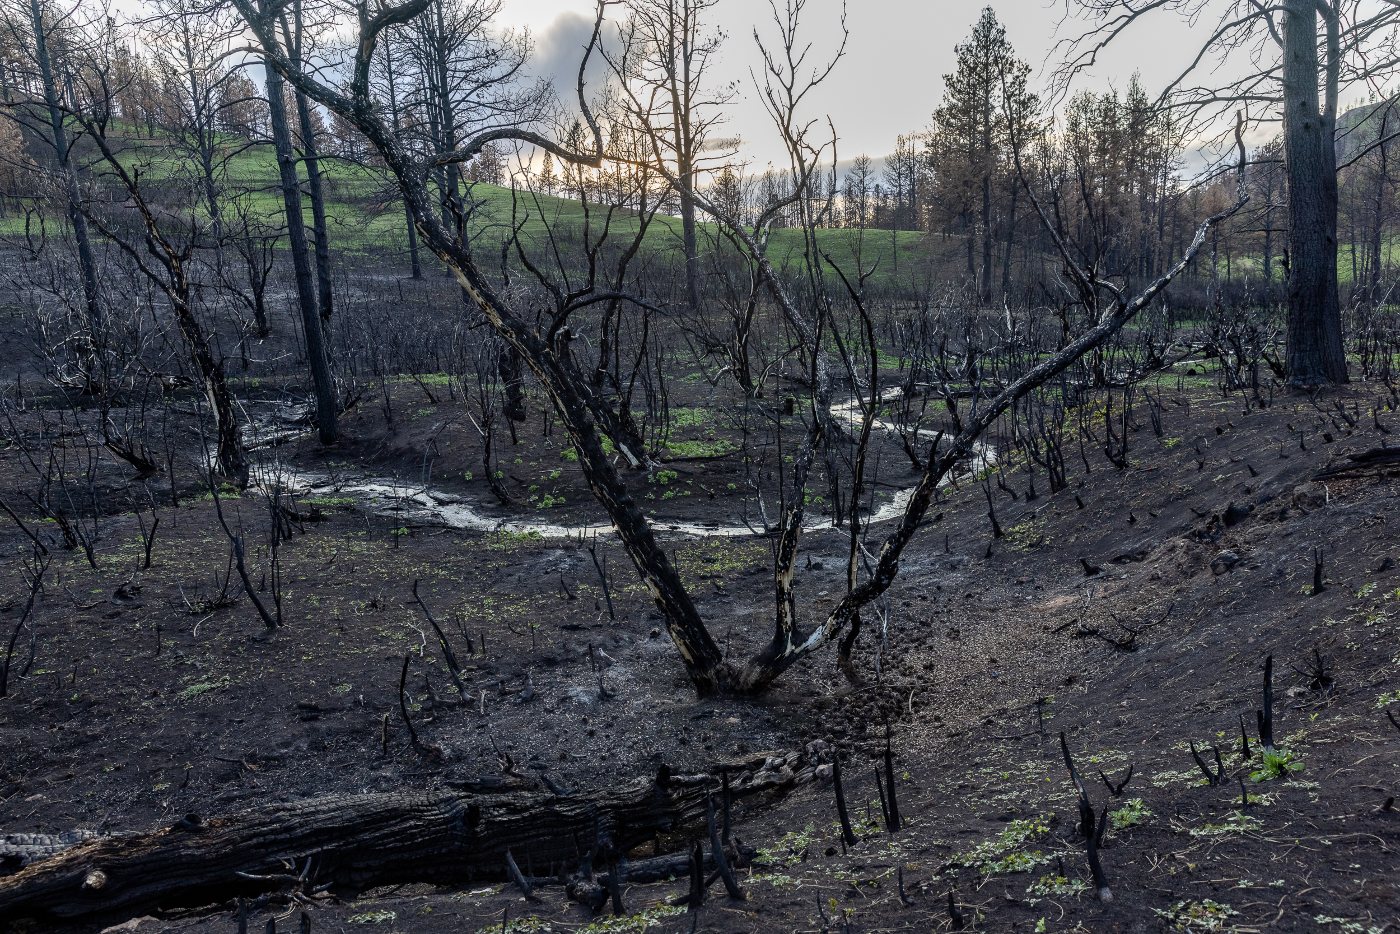 The world’s least understood ignition source is causing devastating wildfires